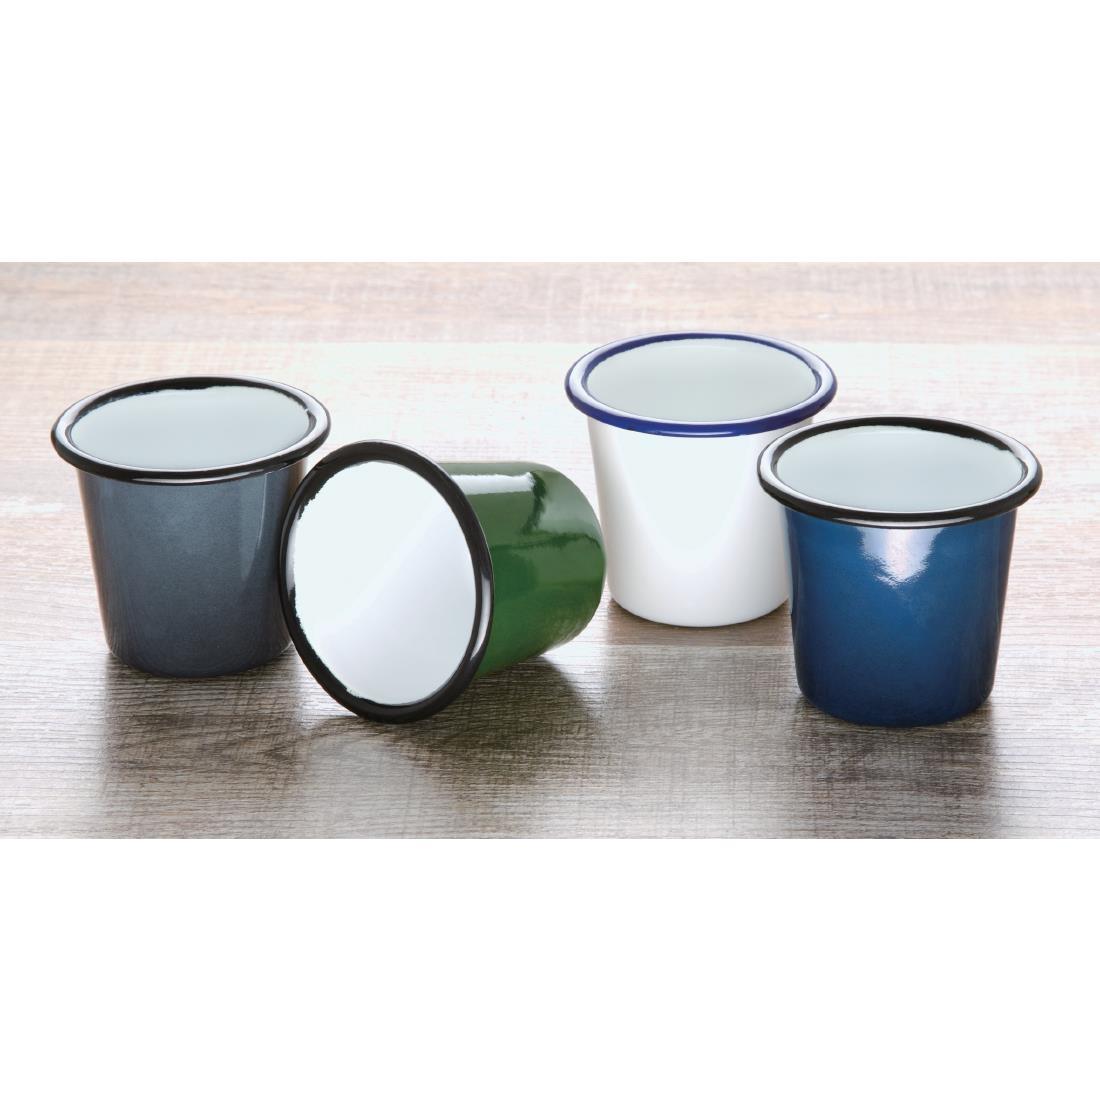 Olympia Enamel Sauce Cup Green And Black (Pack of 6) - DC386  - 2